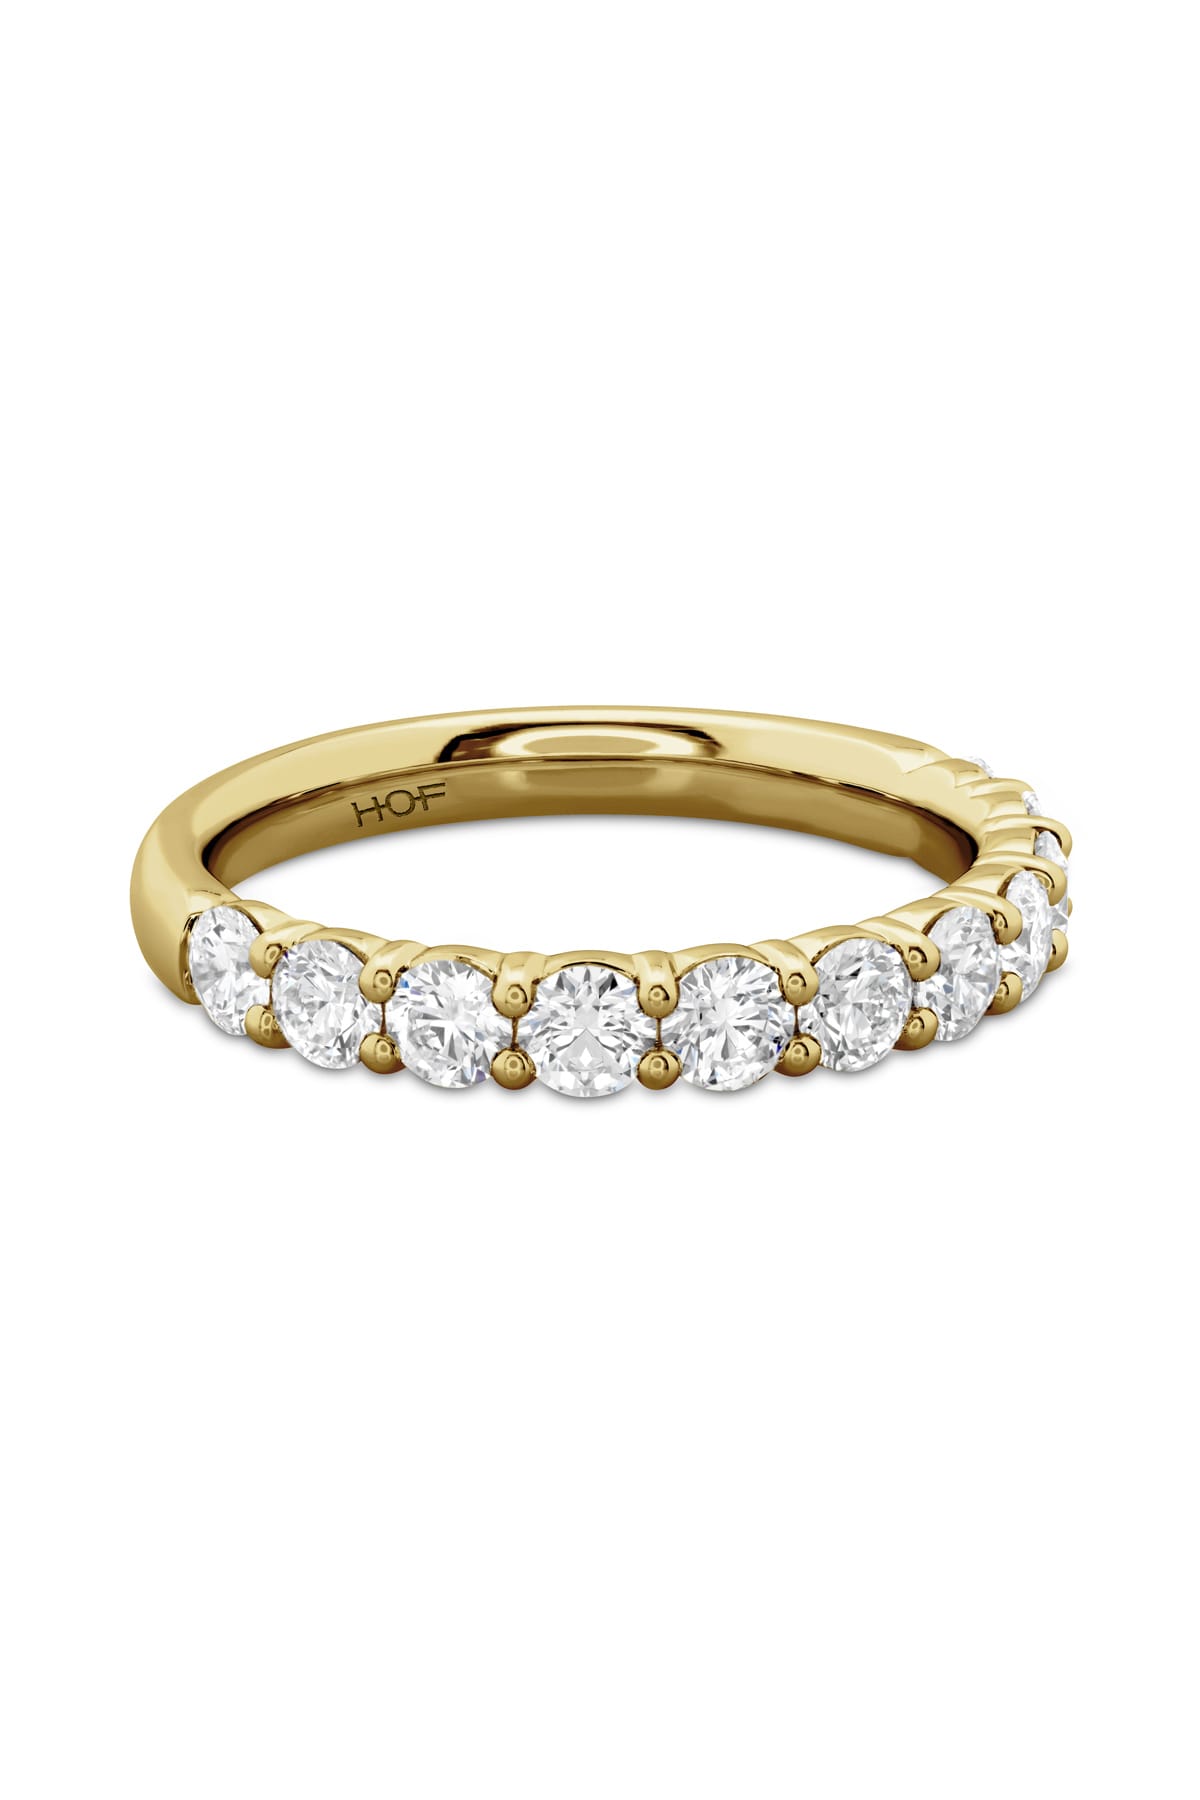 Signature 11 Stone Band From Hearts On Fire available at LeGassick Diamonds and Jewellery Gold Coast, Australia.